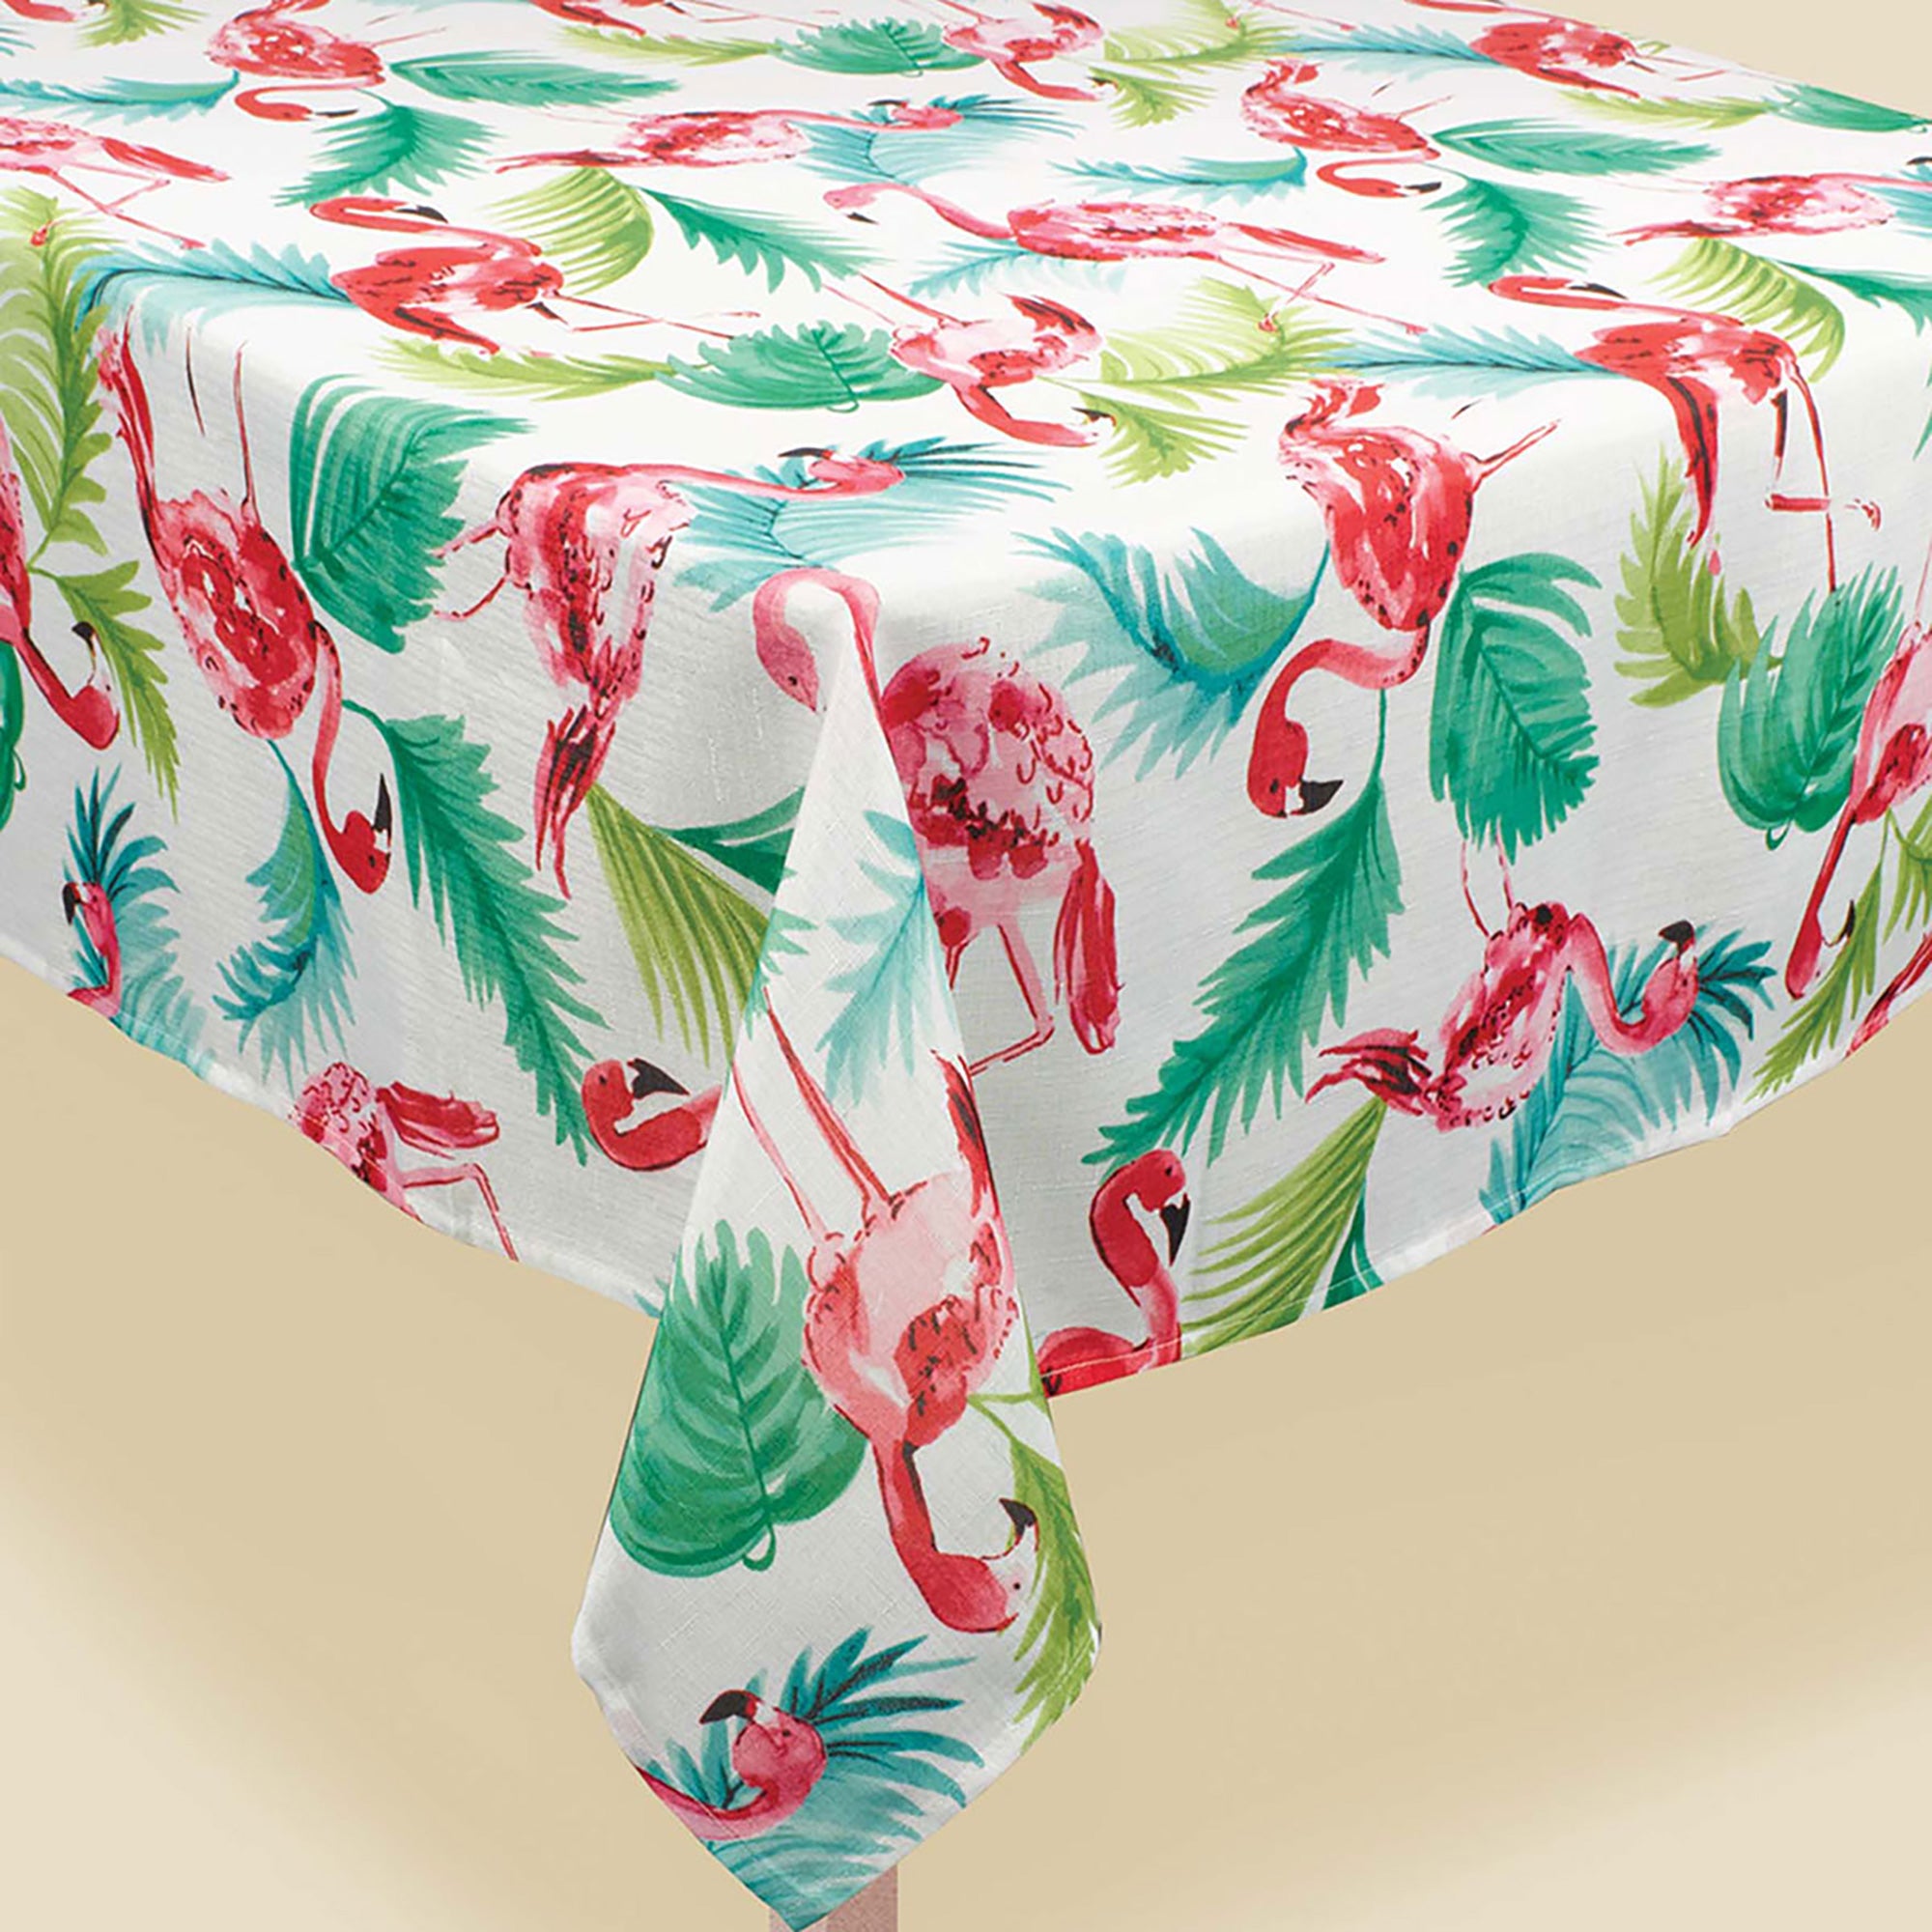 Flamingo Rectangular Fabric Table Cover, 60 x 104 Inches, 1 Count